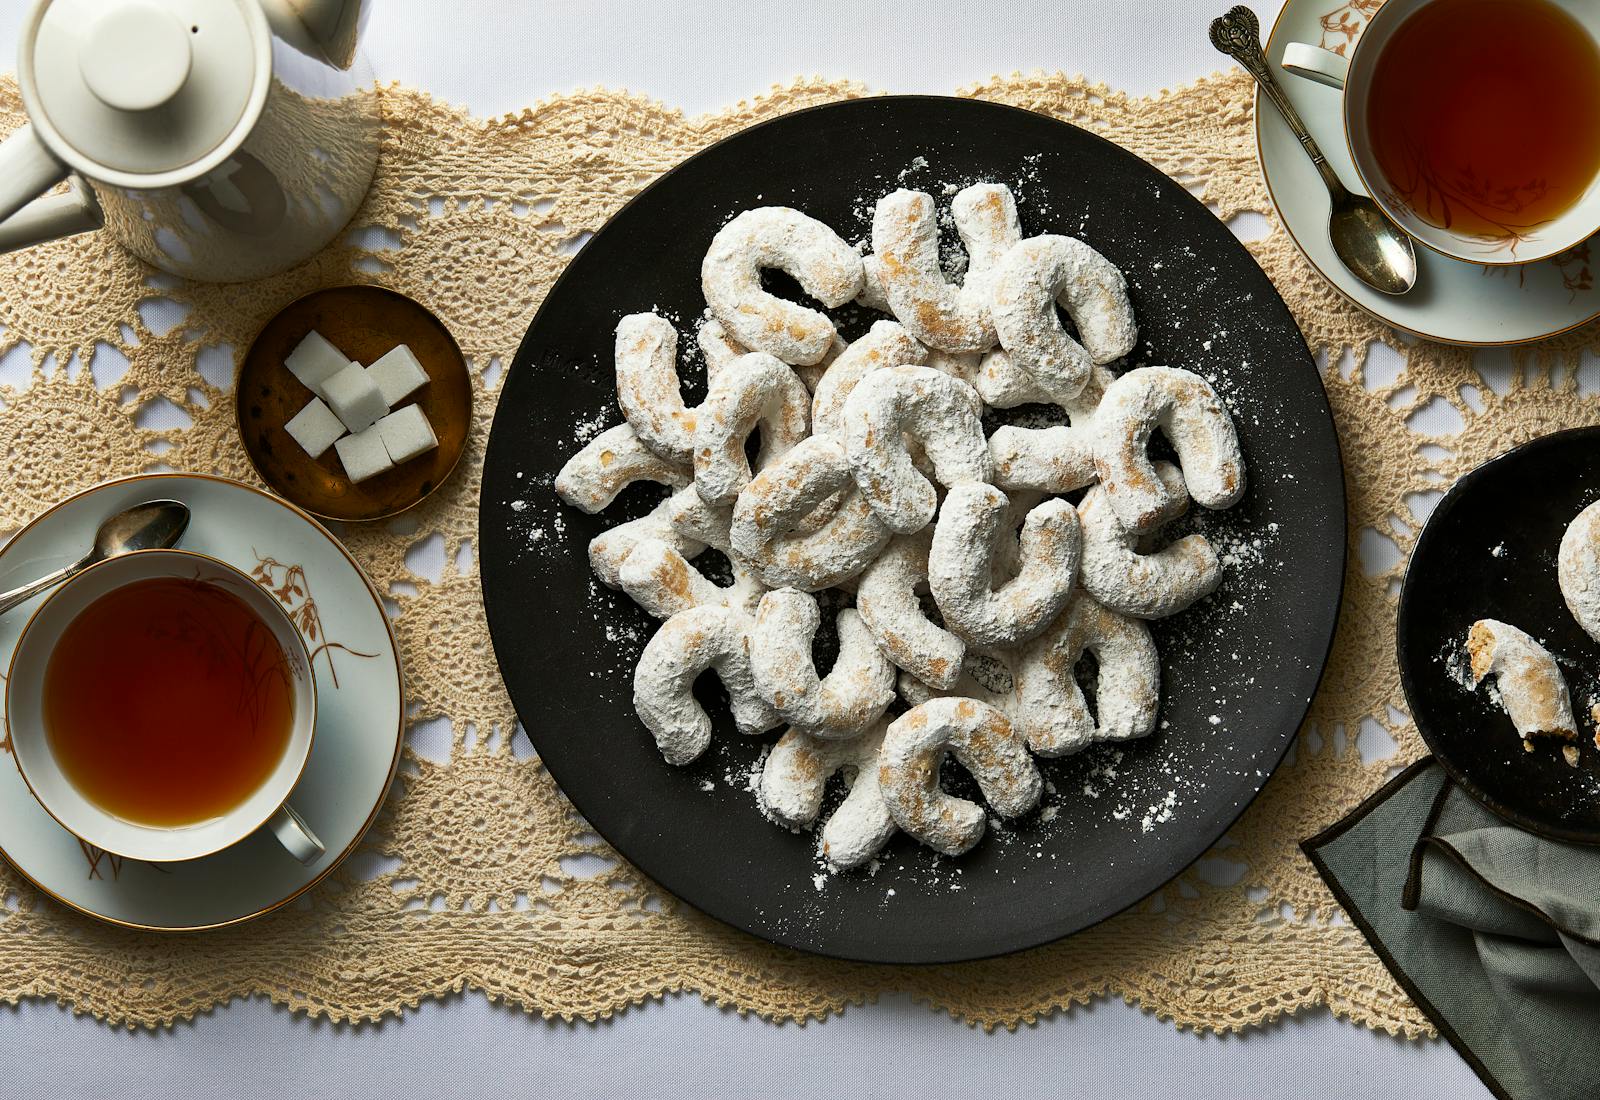 Plate of vanillekipferl served on black plate with tea and sugar on the side, atop beige latice table runner.